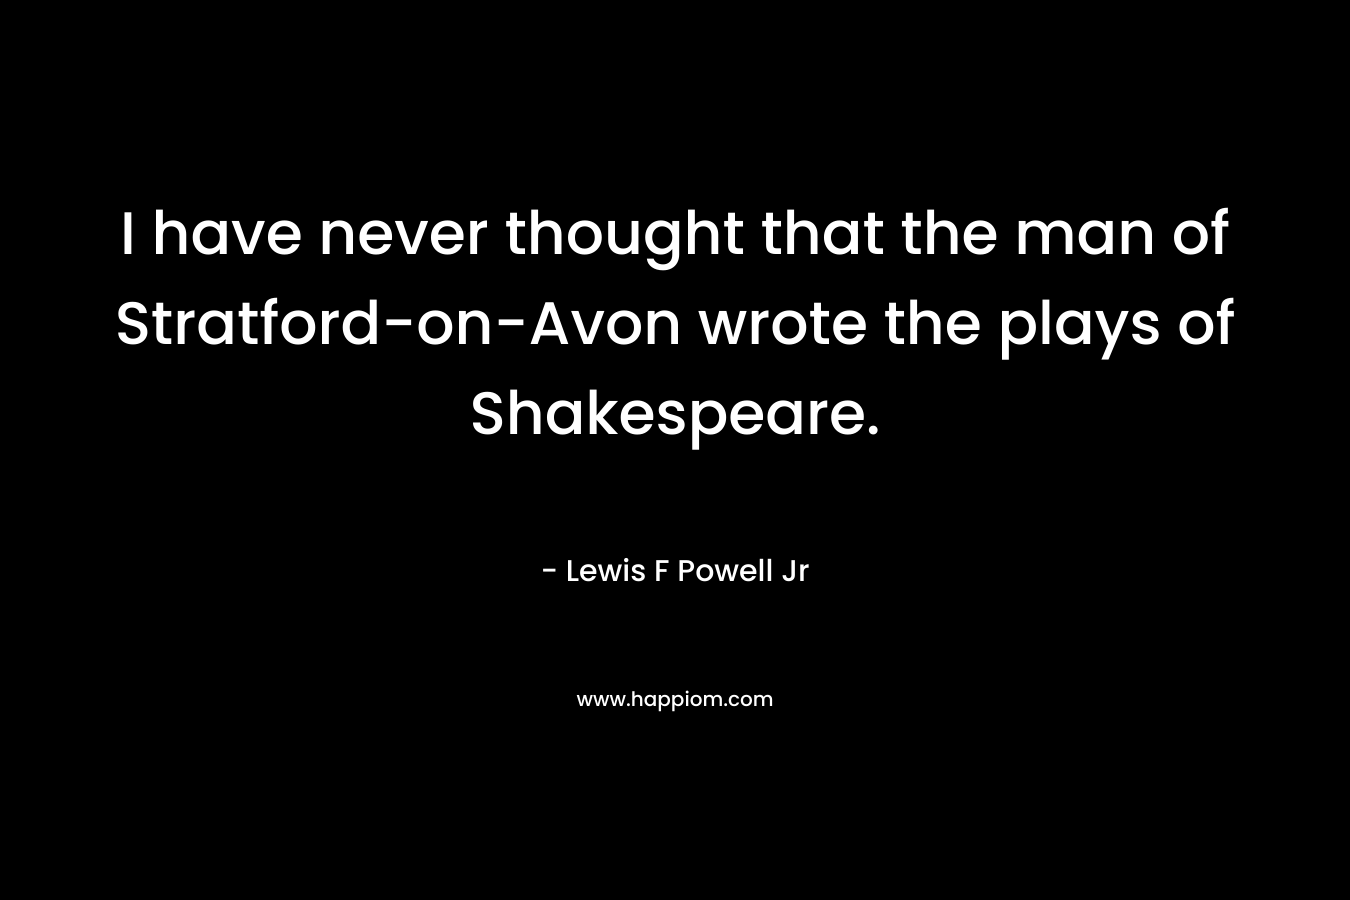 I have never thought that the man of Stratford-on-Avon wrote the plays of Shakespeare. – Lewis F Powell Jr